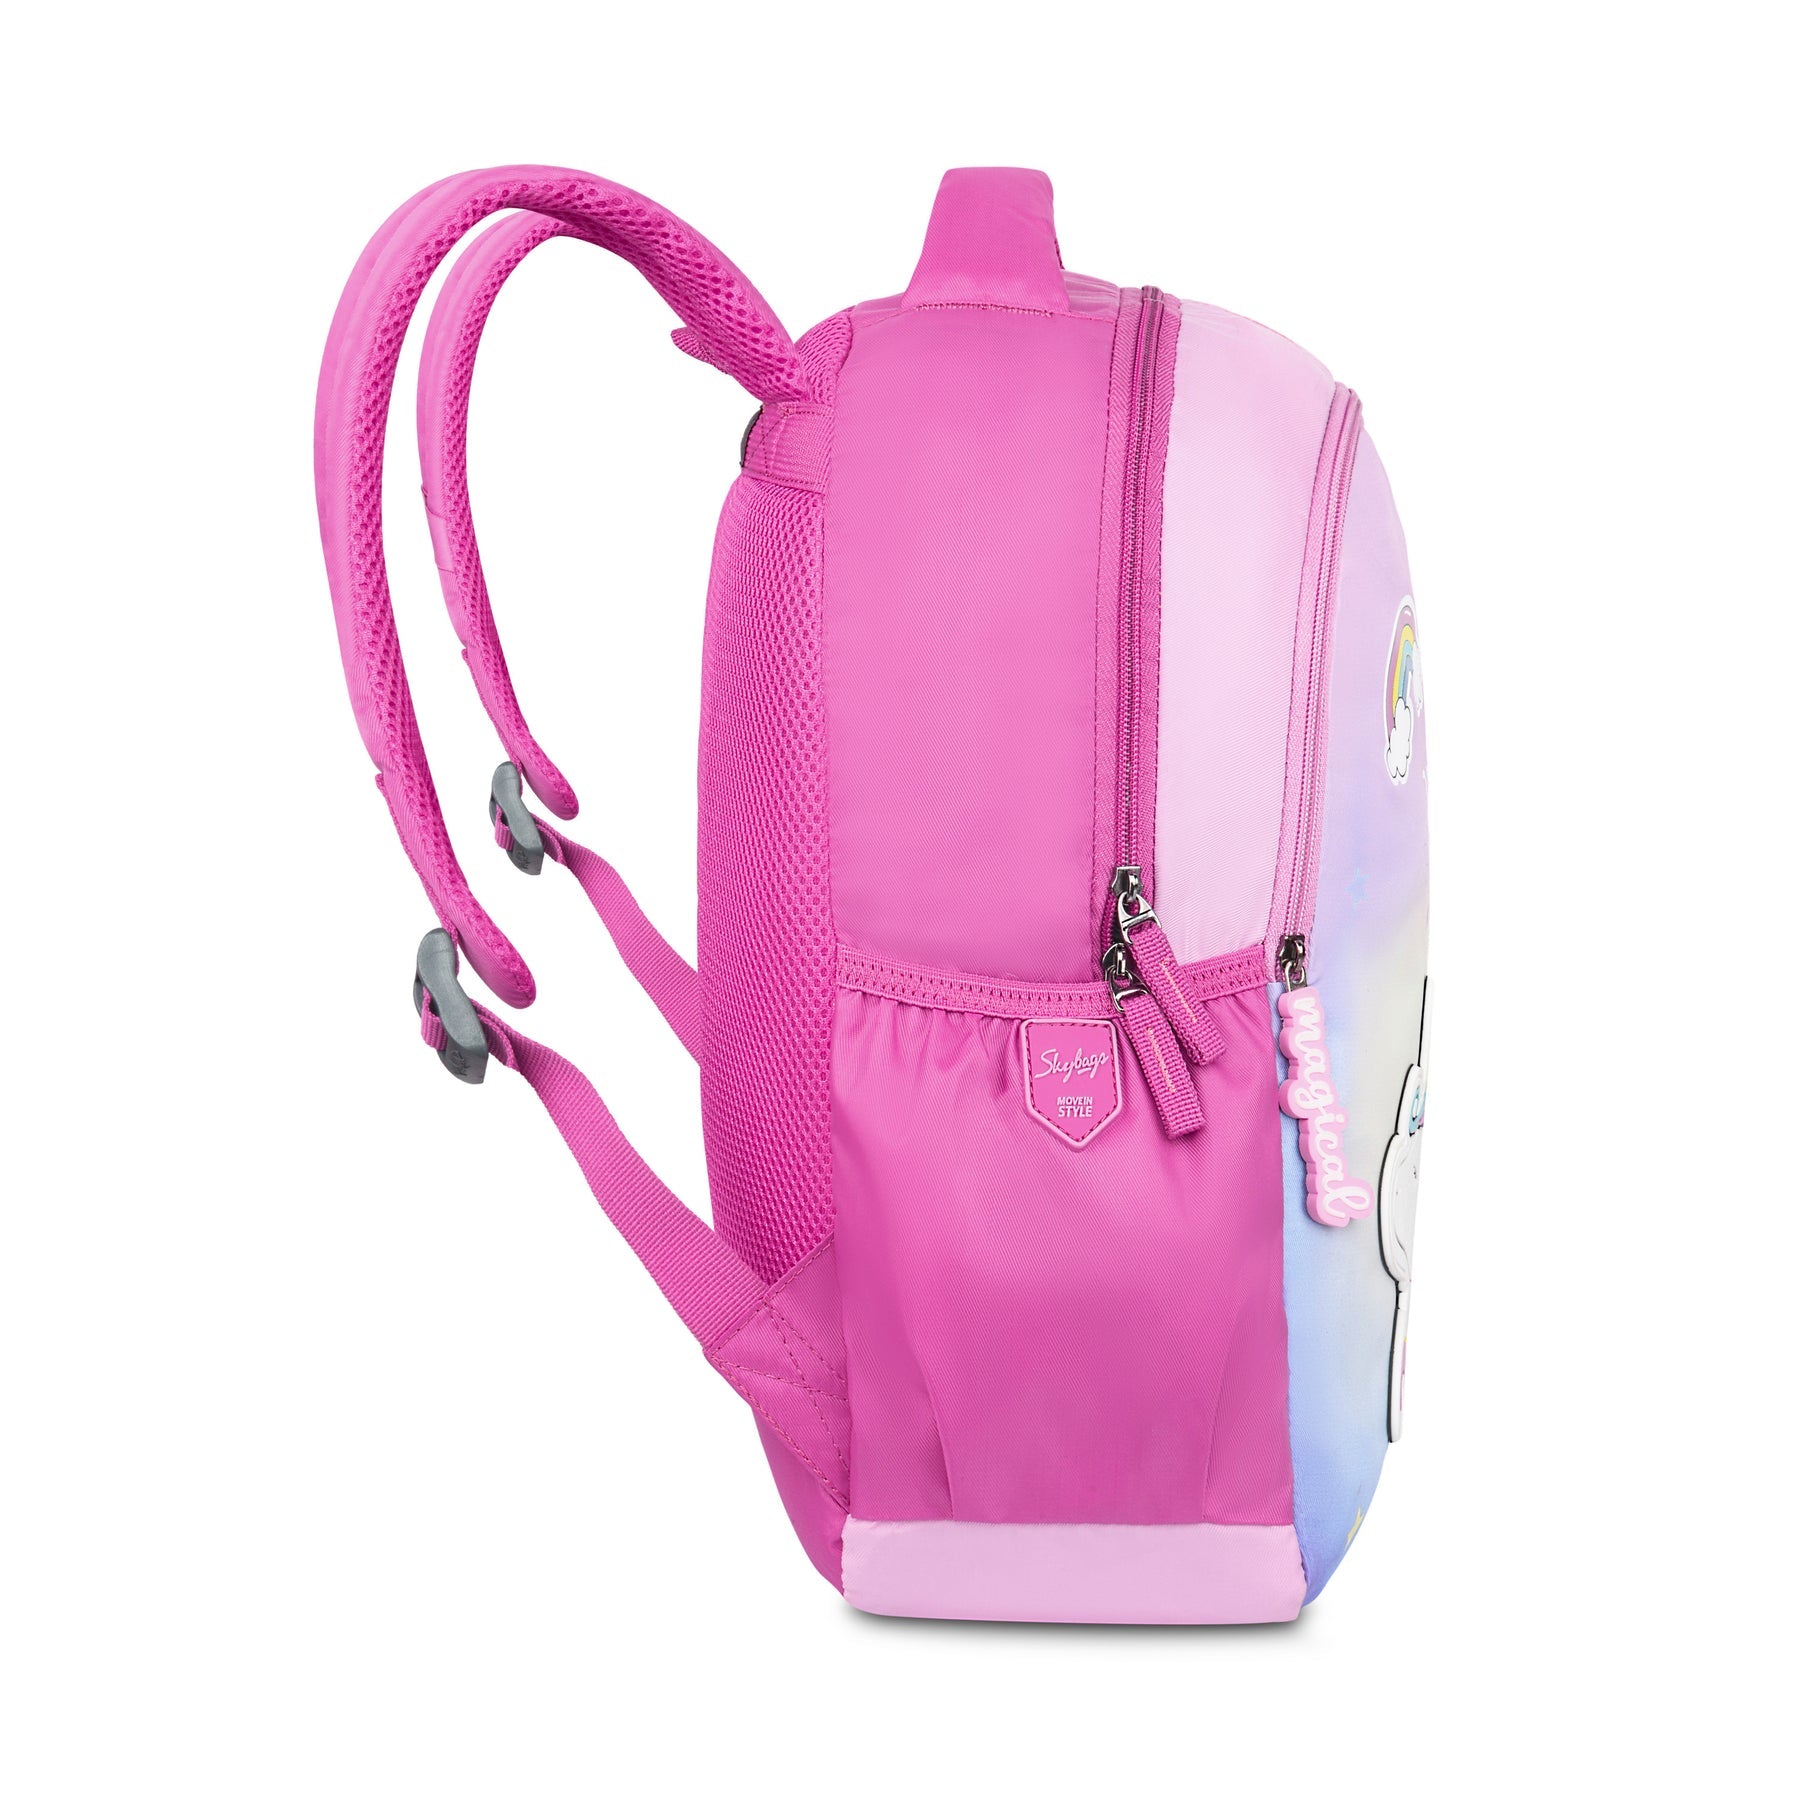 Skybags Bubbles Unicorn School Bag 03 | Bags & Sleeves | Halabh.com